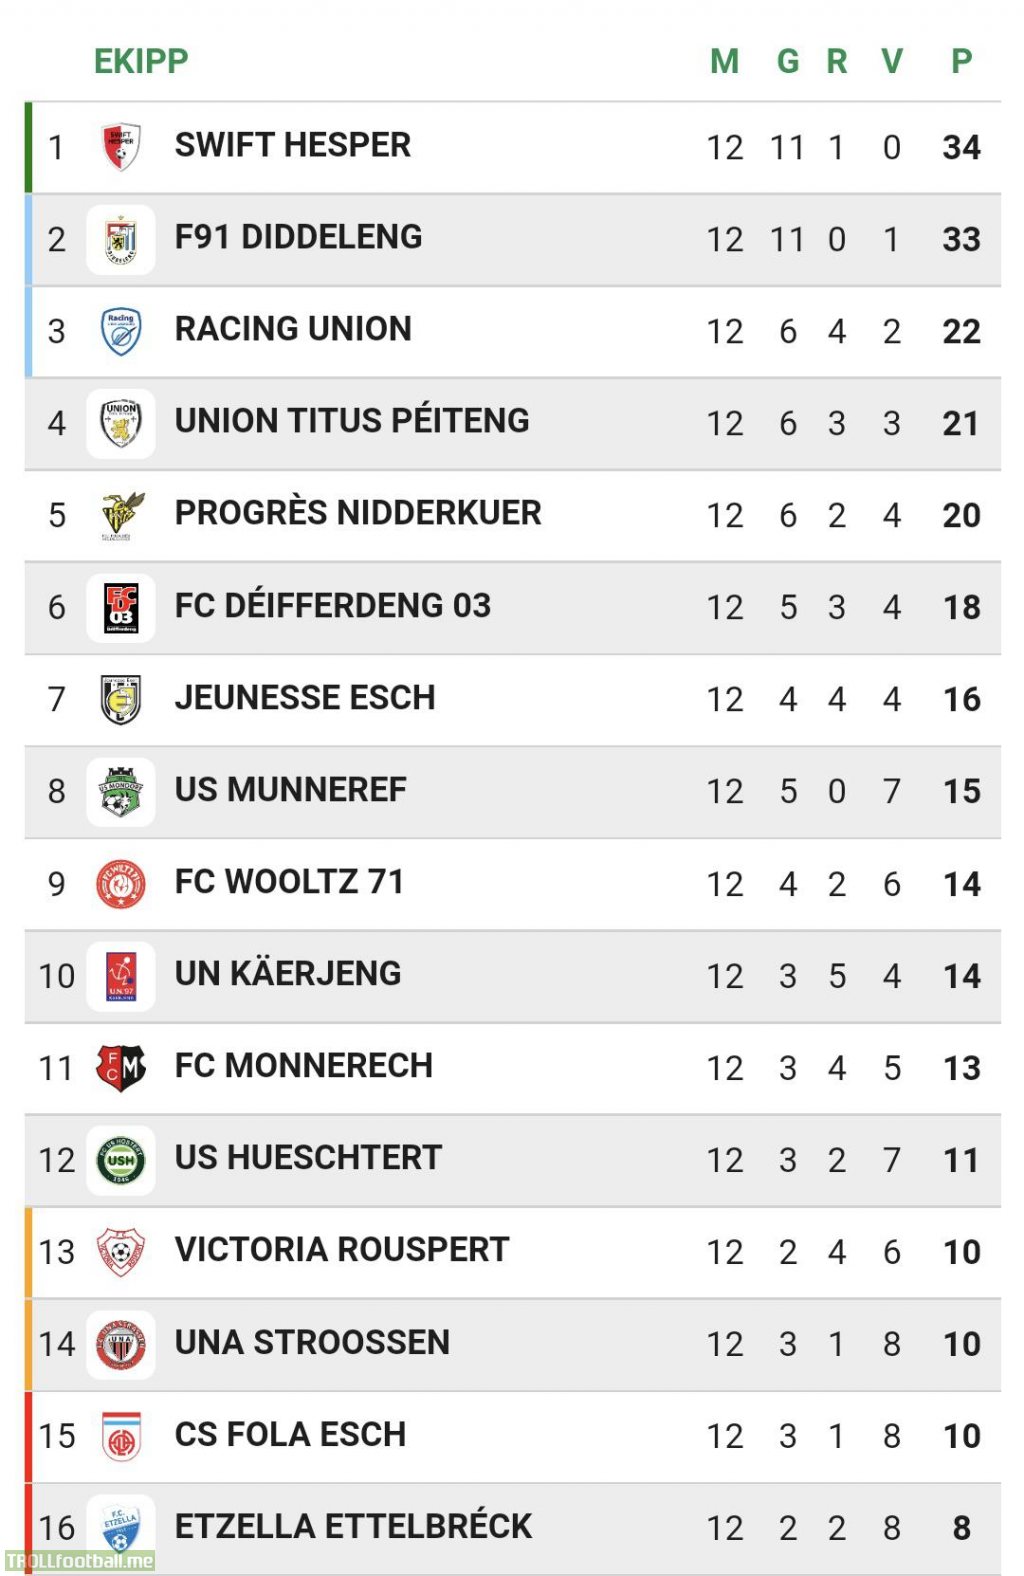 the current 3rd place is as close to relegation as to the 2nd place... I've never seen that before in the BGL League (Luxembourg)